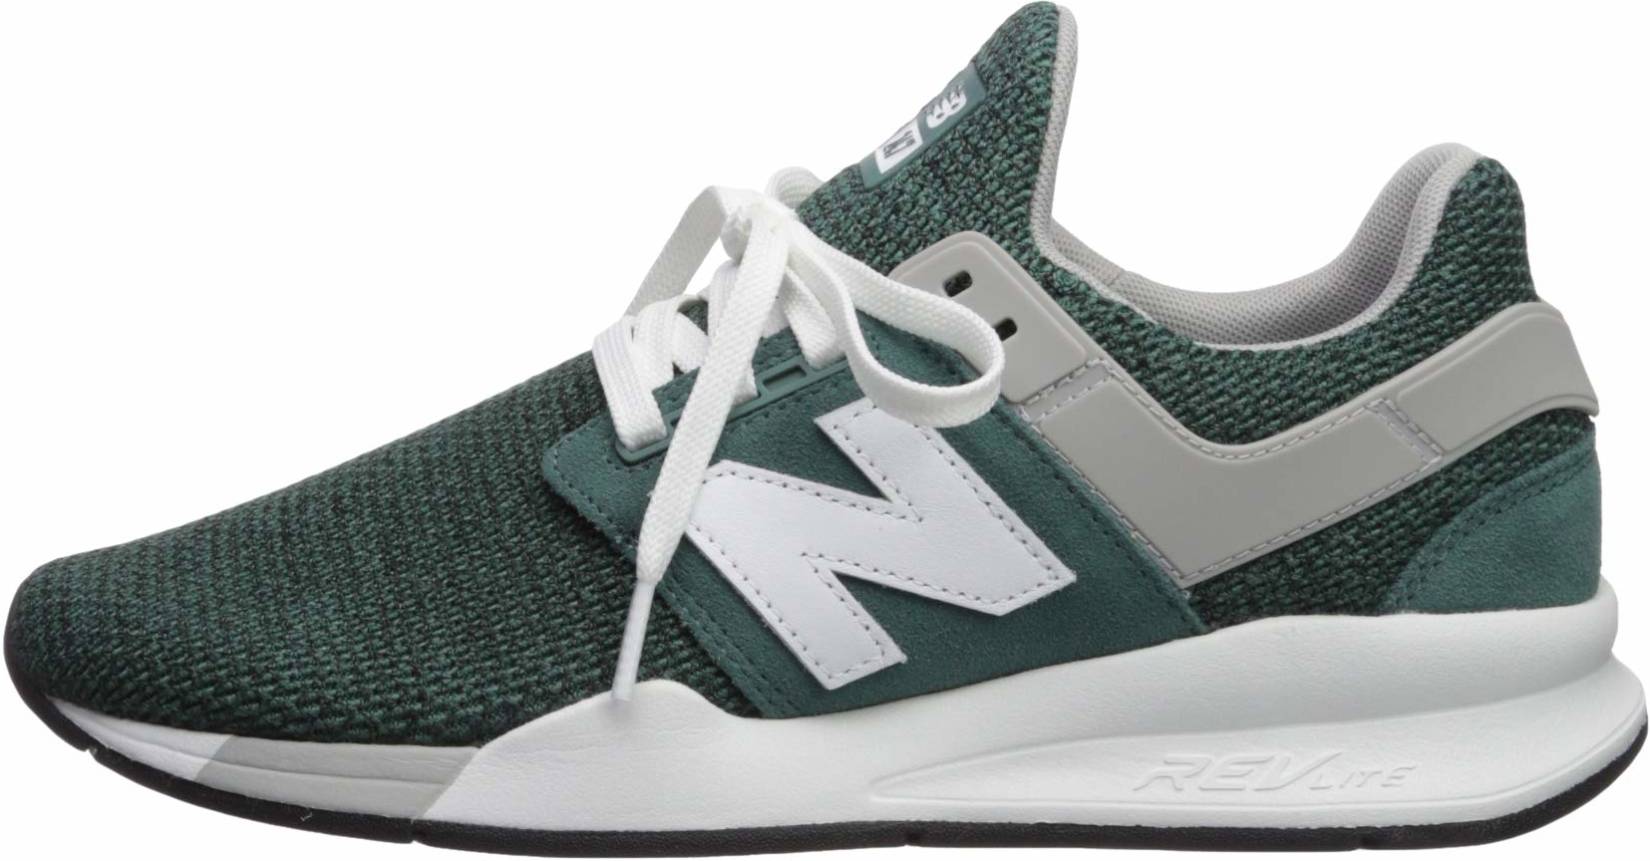 New Balance 247 v2 sneakers in 10 colors (only $39) | RunRepeat